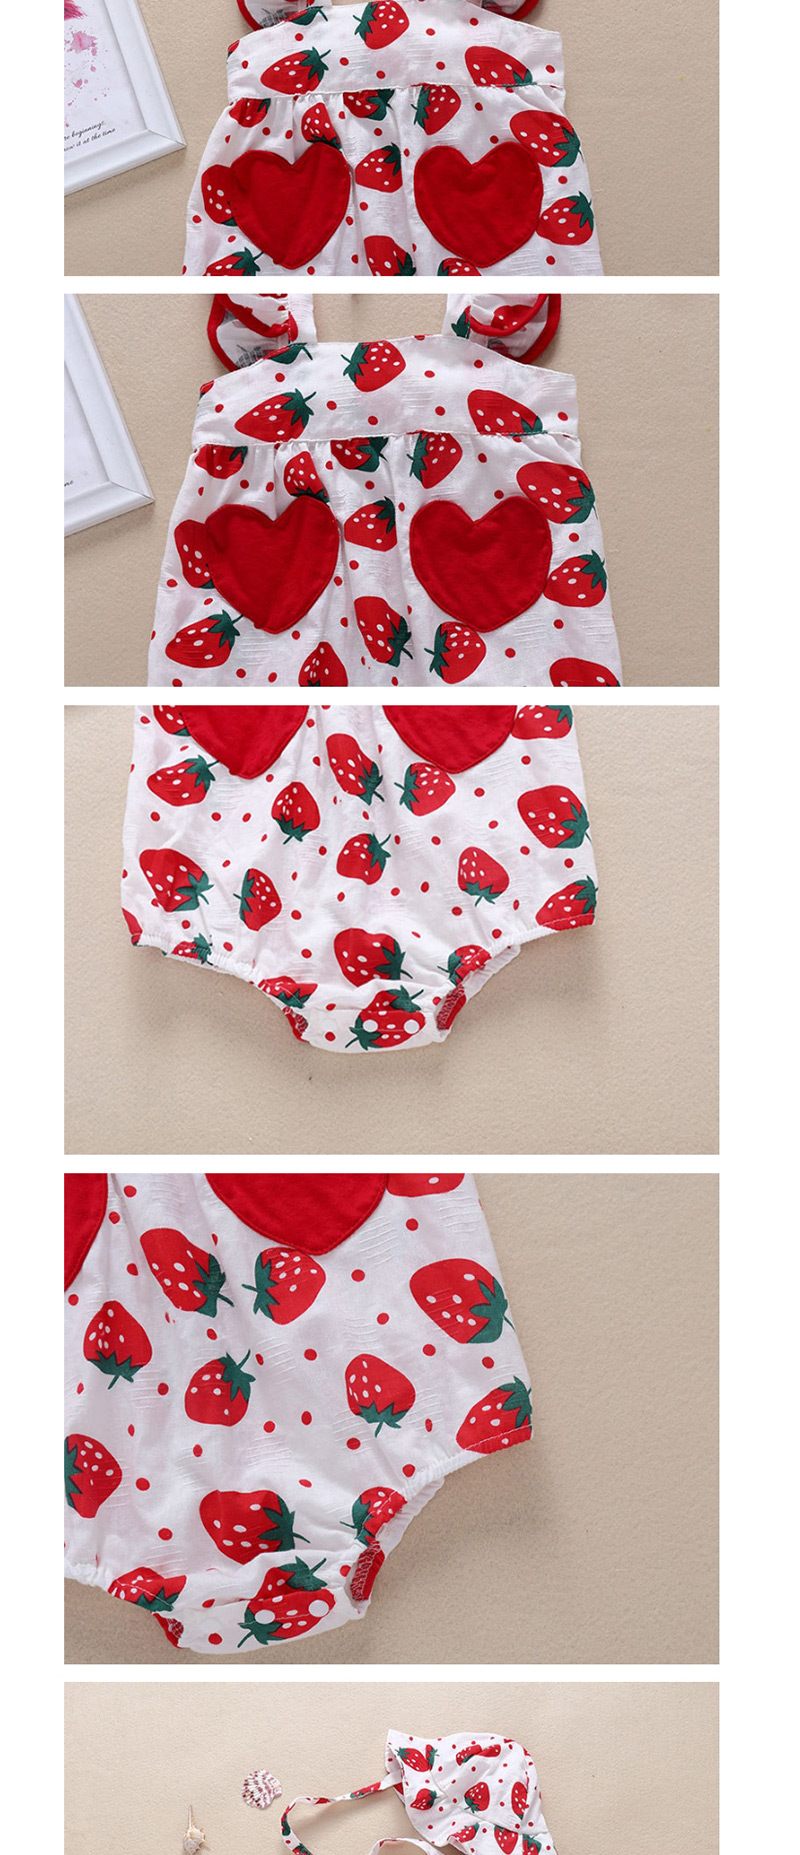 Fashion Pink Apple Fruit Print Love Patch Pocket Baby Triangle Lace,Kids Clothing